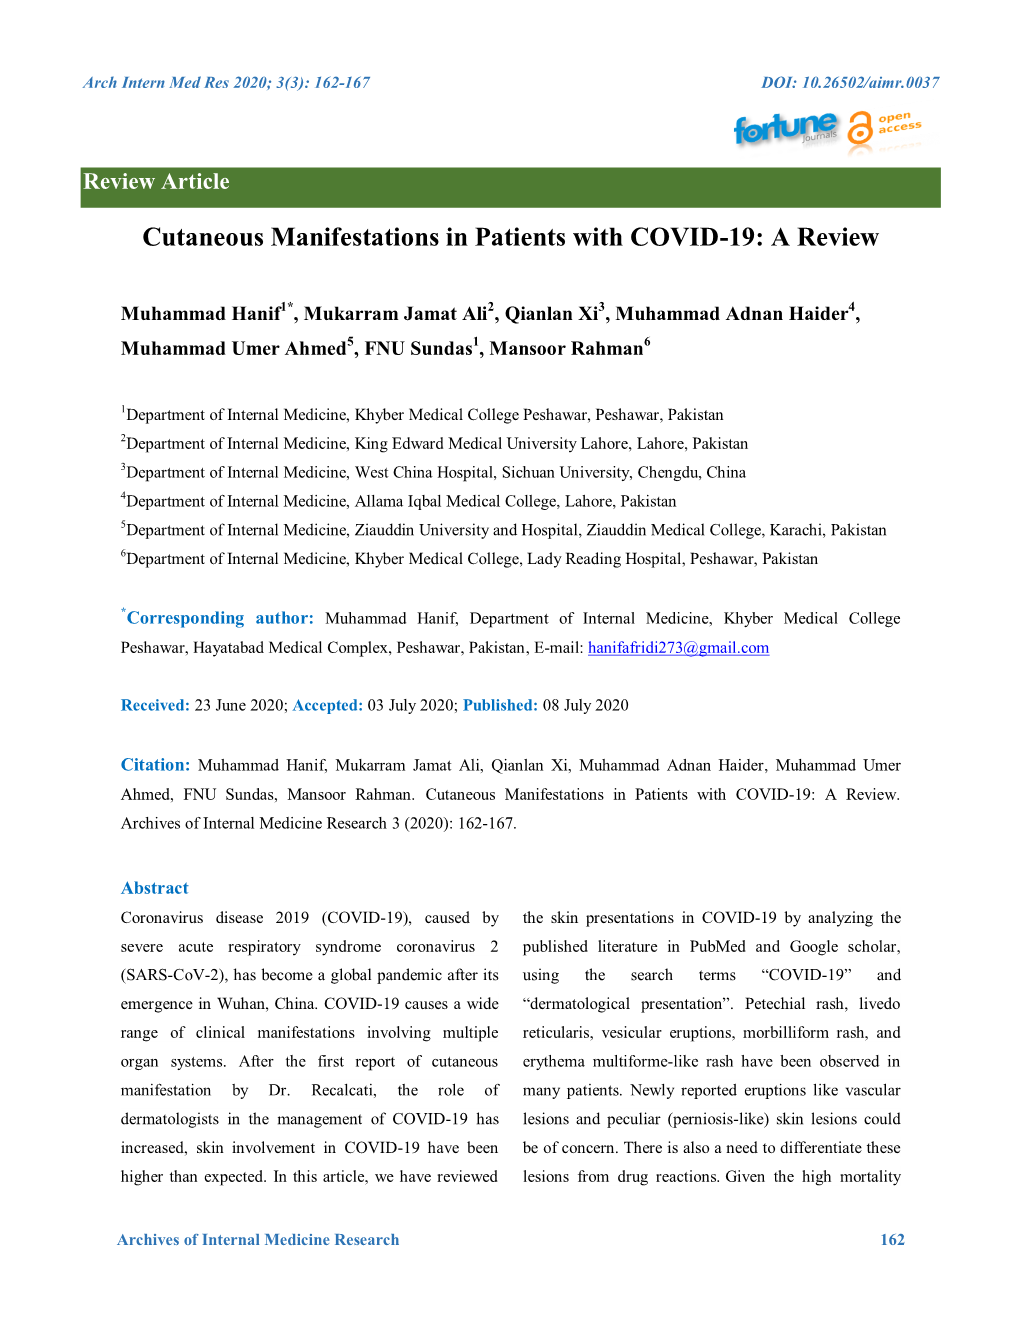 Cutaneous Manifestations in Patients with COVID-19: a Review